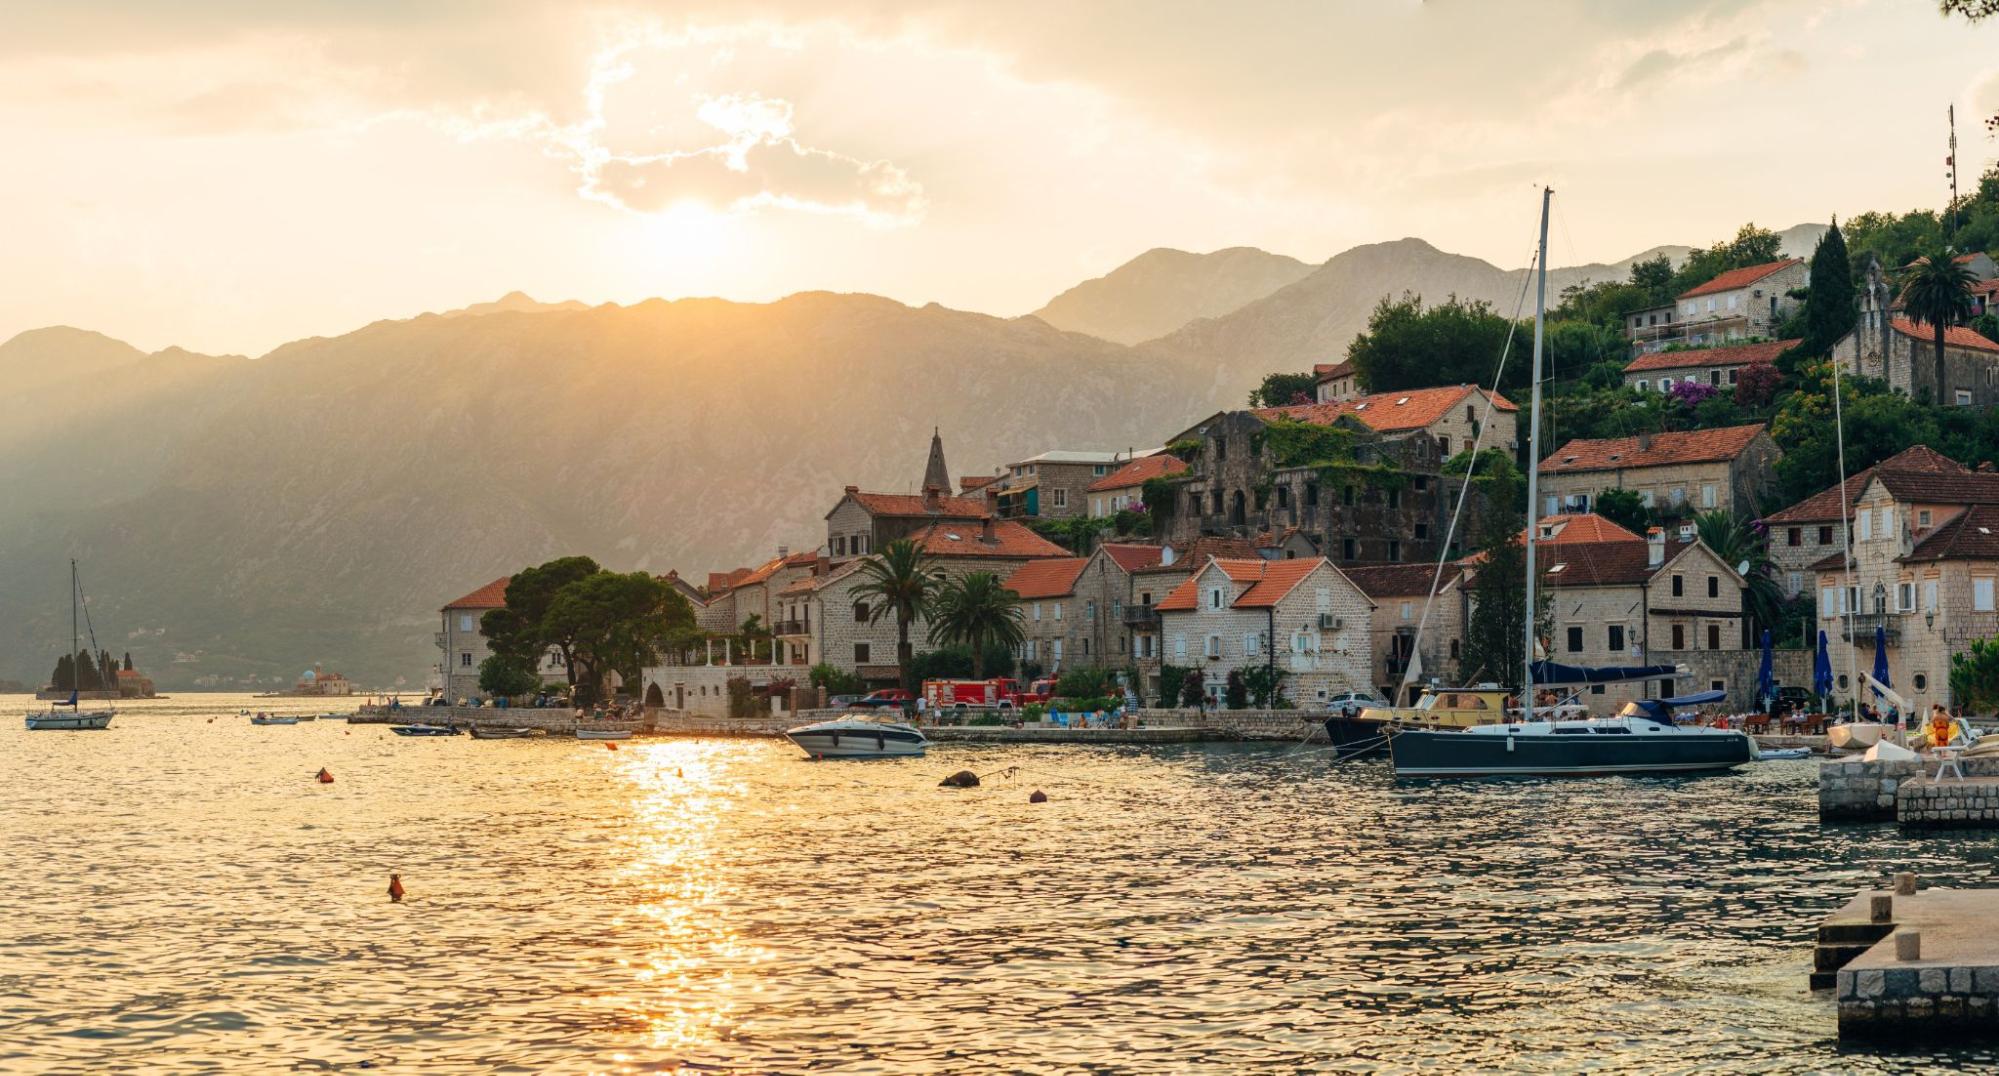 The old fishing town of Perast on the shore of Kotor Bay in Montenegro